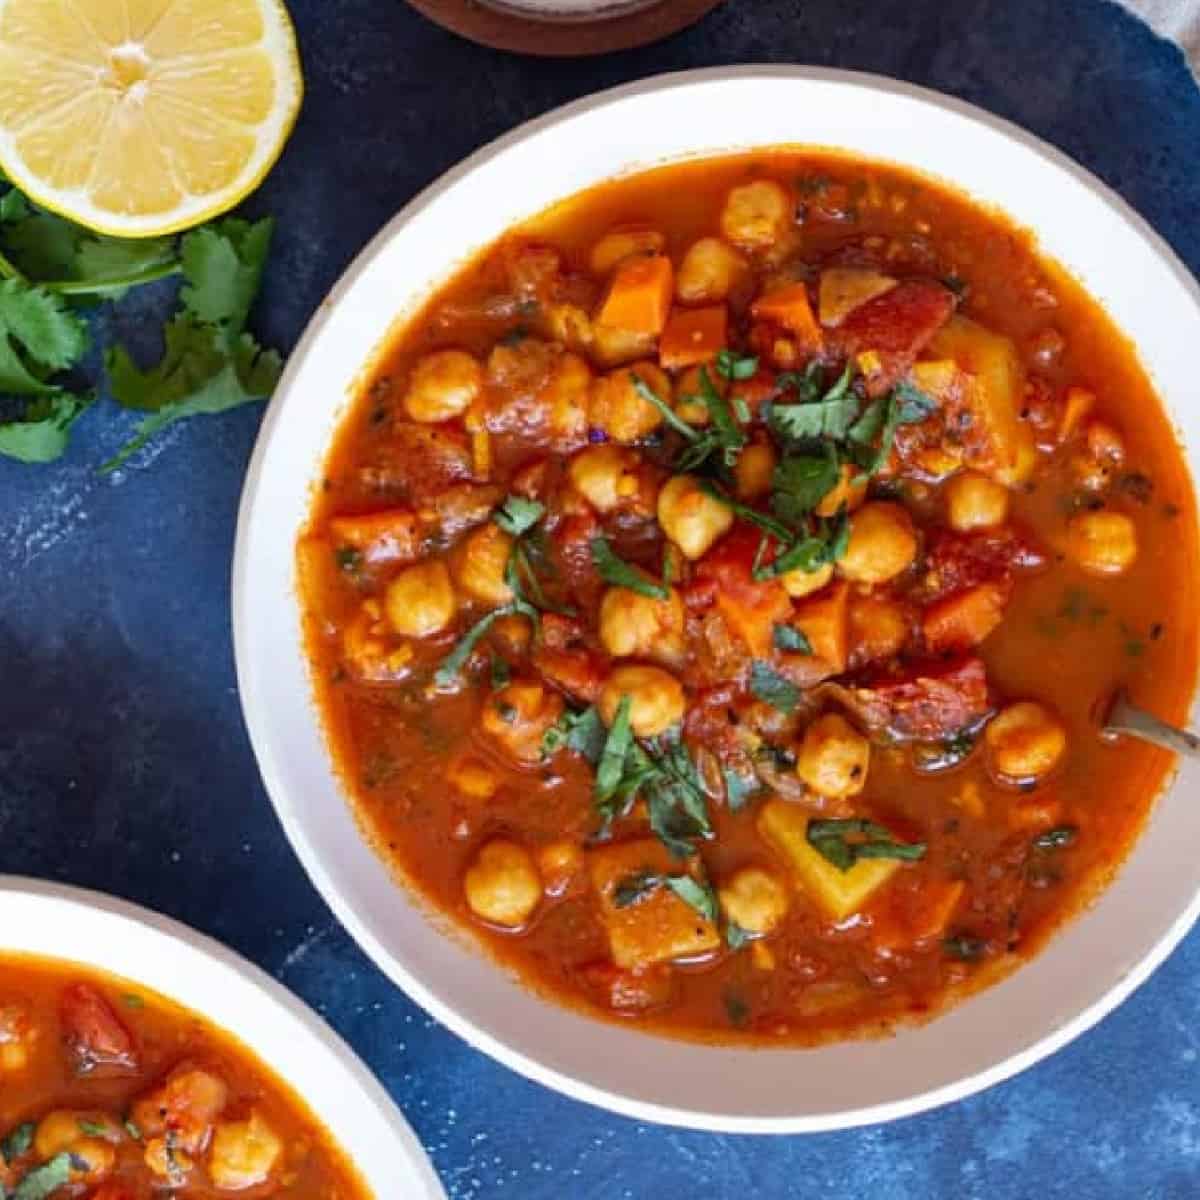 easy healthy dinner ideas -Moroccan chickpea stew is made with simple ingredients and flavored with warm spices. It’s easy and ready in no time!
